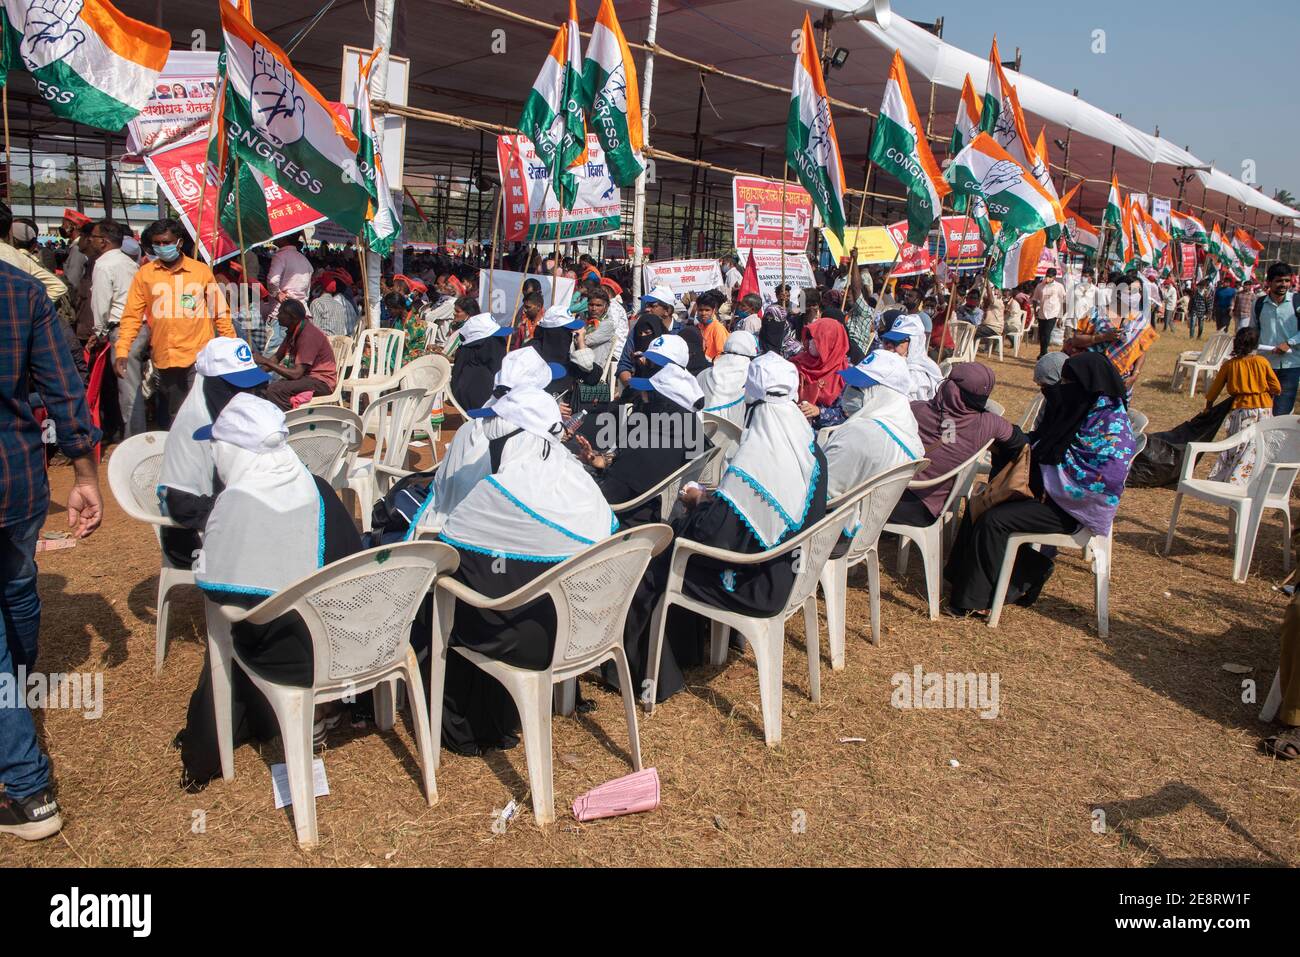 Mumbai , India - 25 January 2021, Muslim woman activists protesters in a black burqa hold up indian flag and signs sitting   near pandal in a rally at Stock Photo